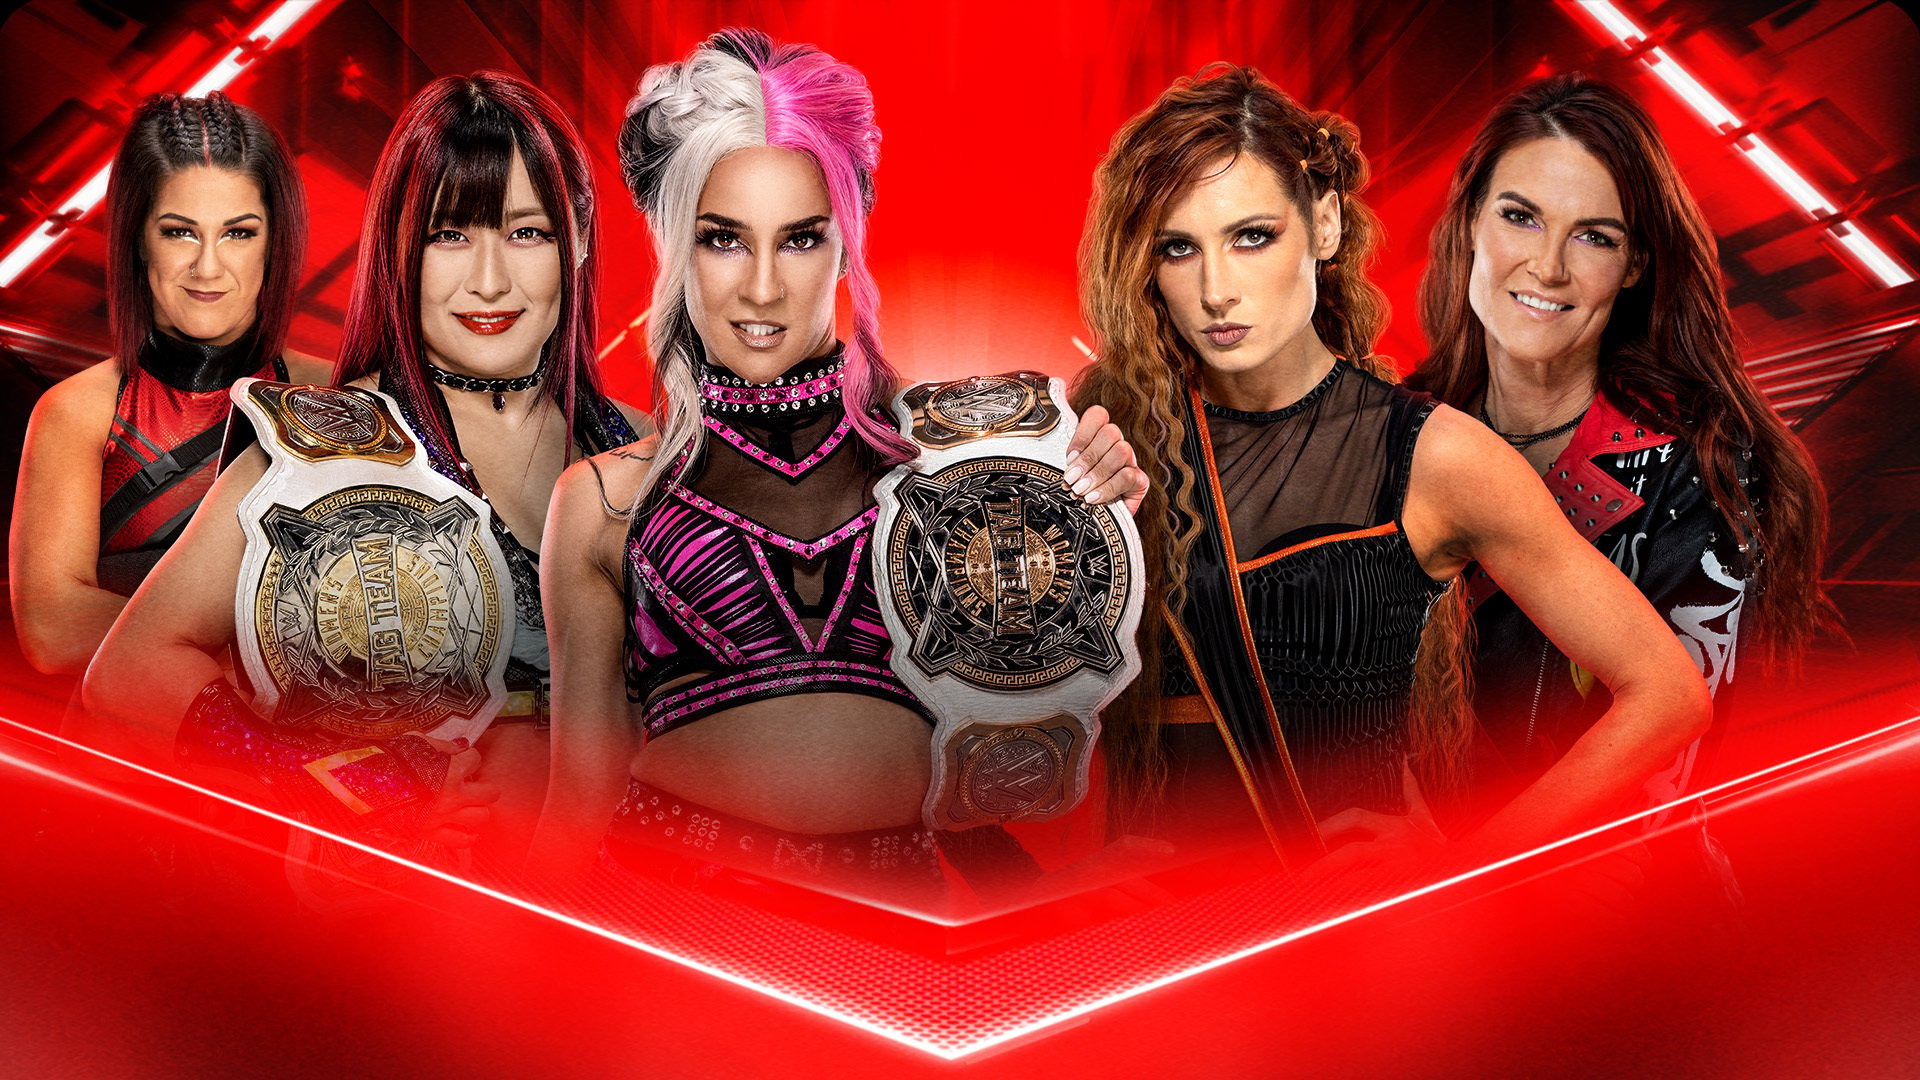 Raw Preview: Becky Lynch & Lita challenge Damage CTRL for the WWE Women's Tag Team Titles